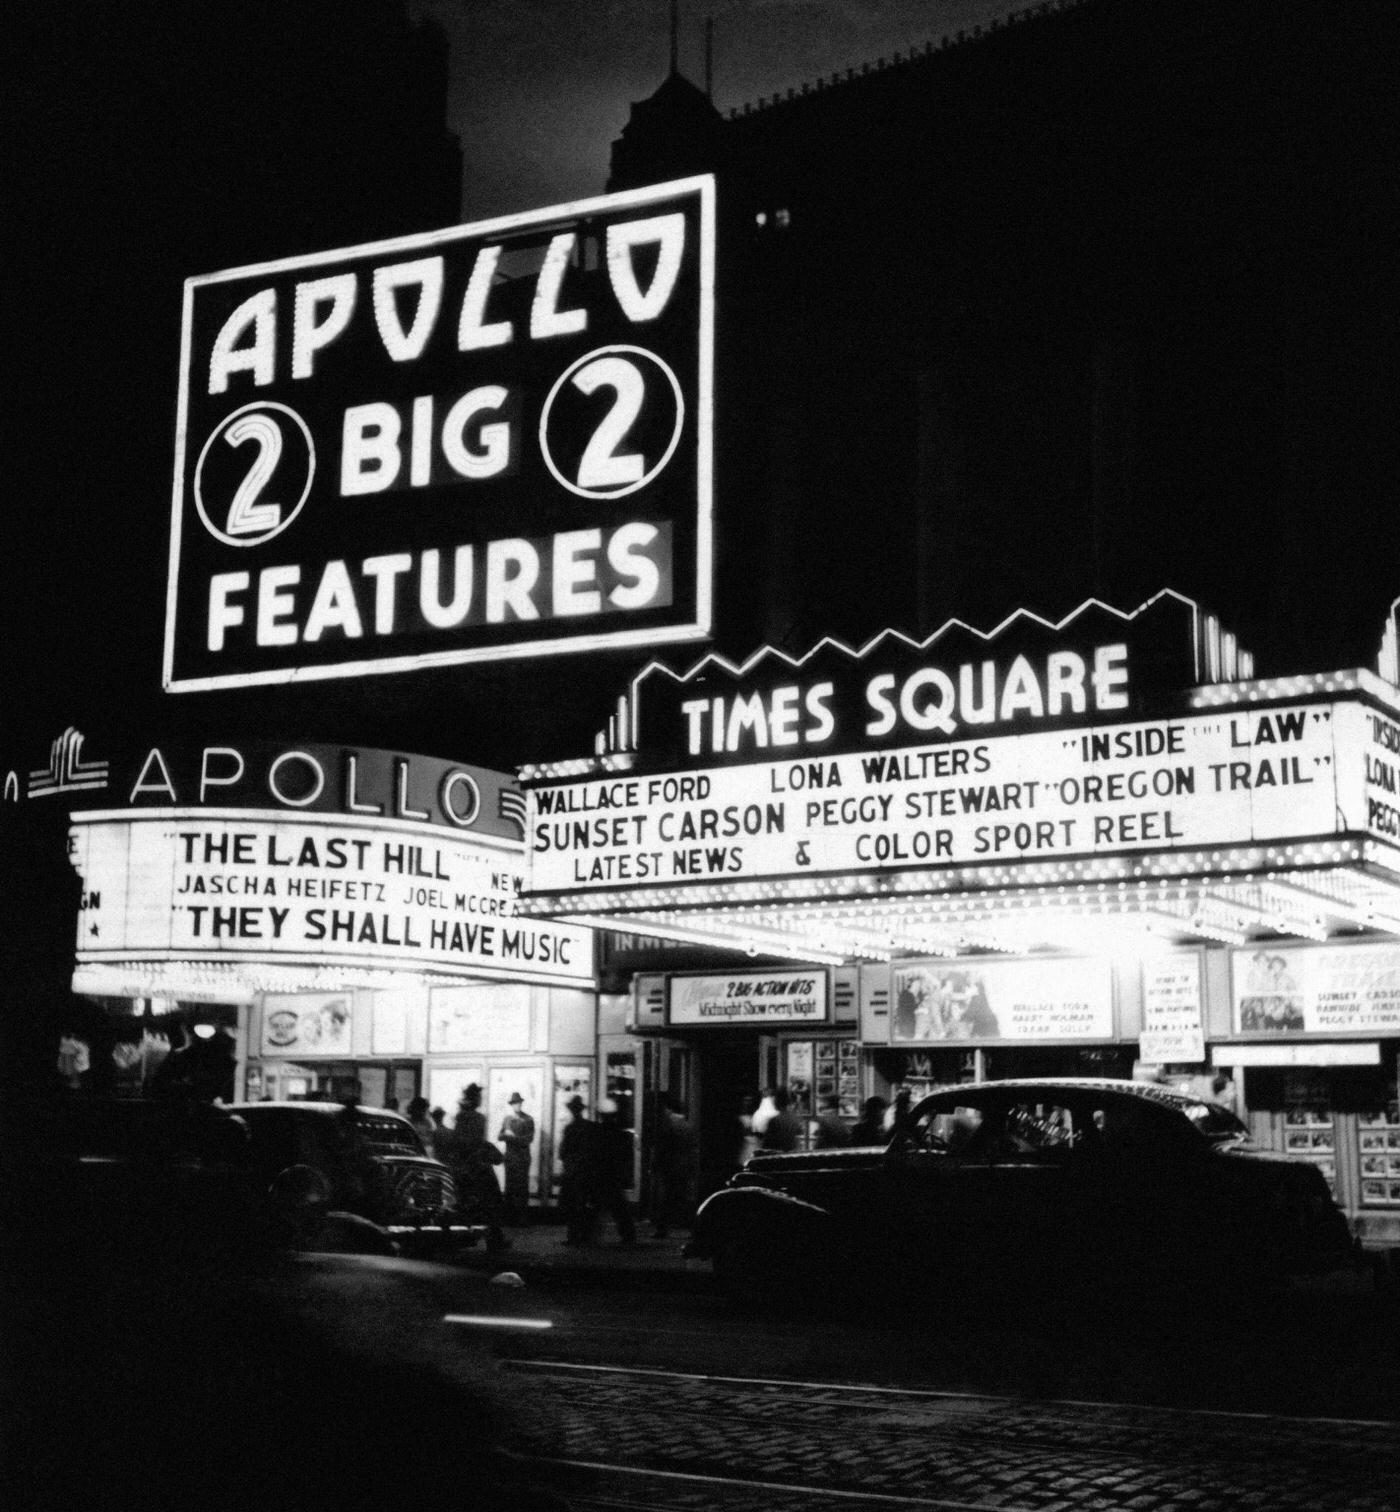 Illuminated Storefronts Of Apollo Theater And Times Square Theater, Manhattan, 1947